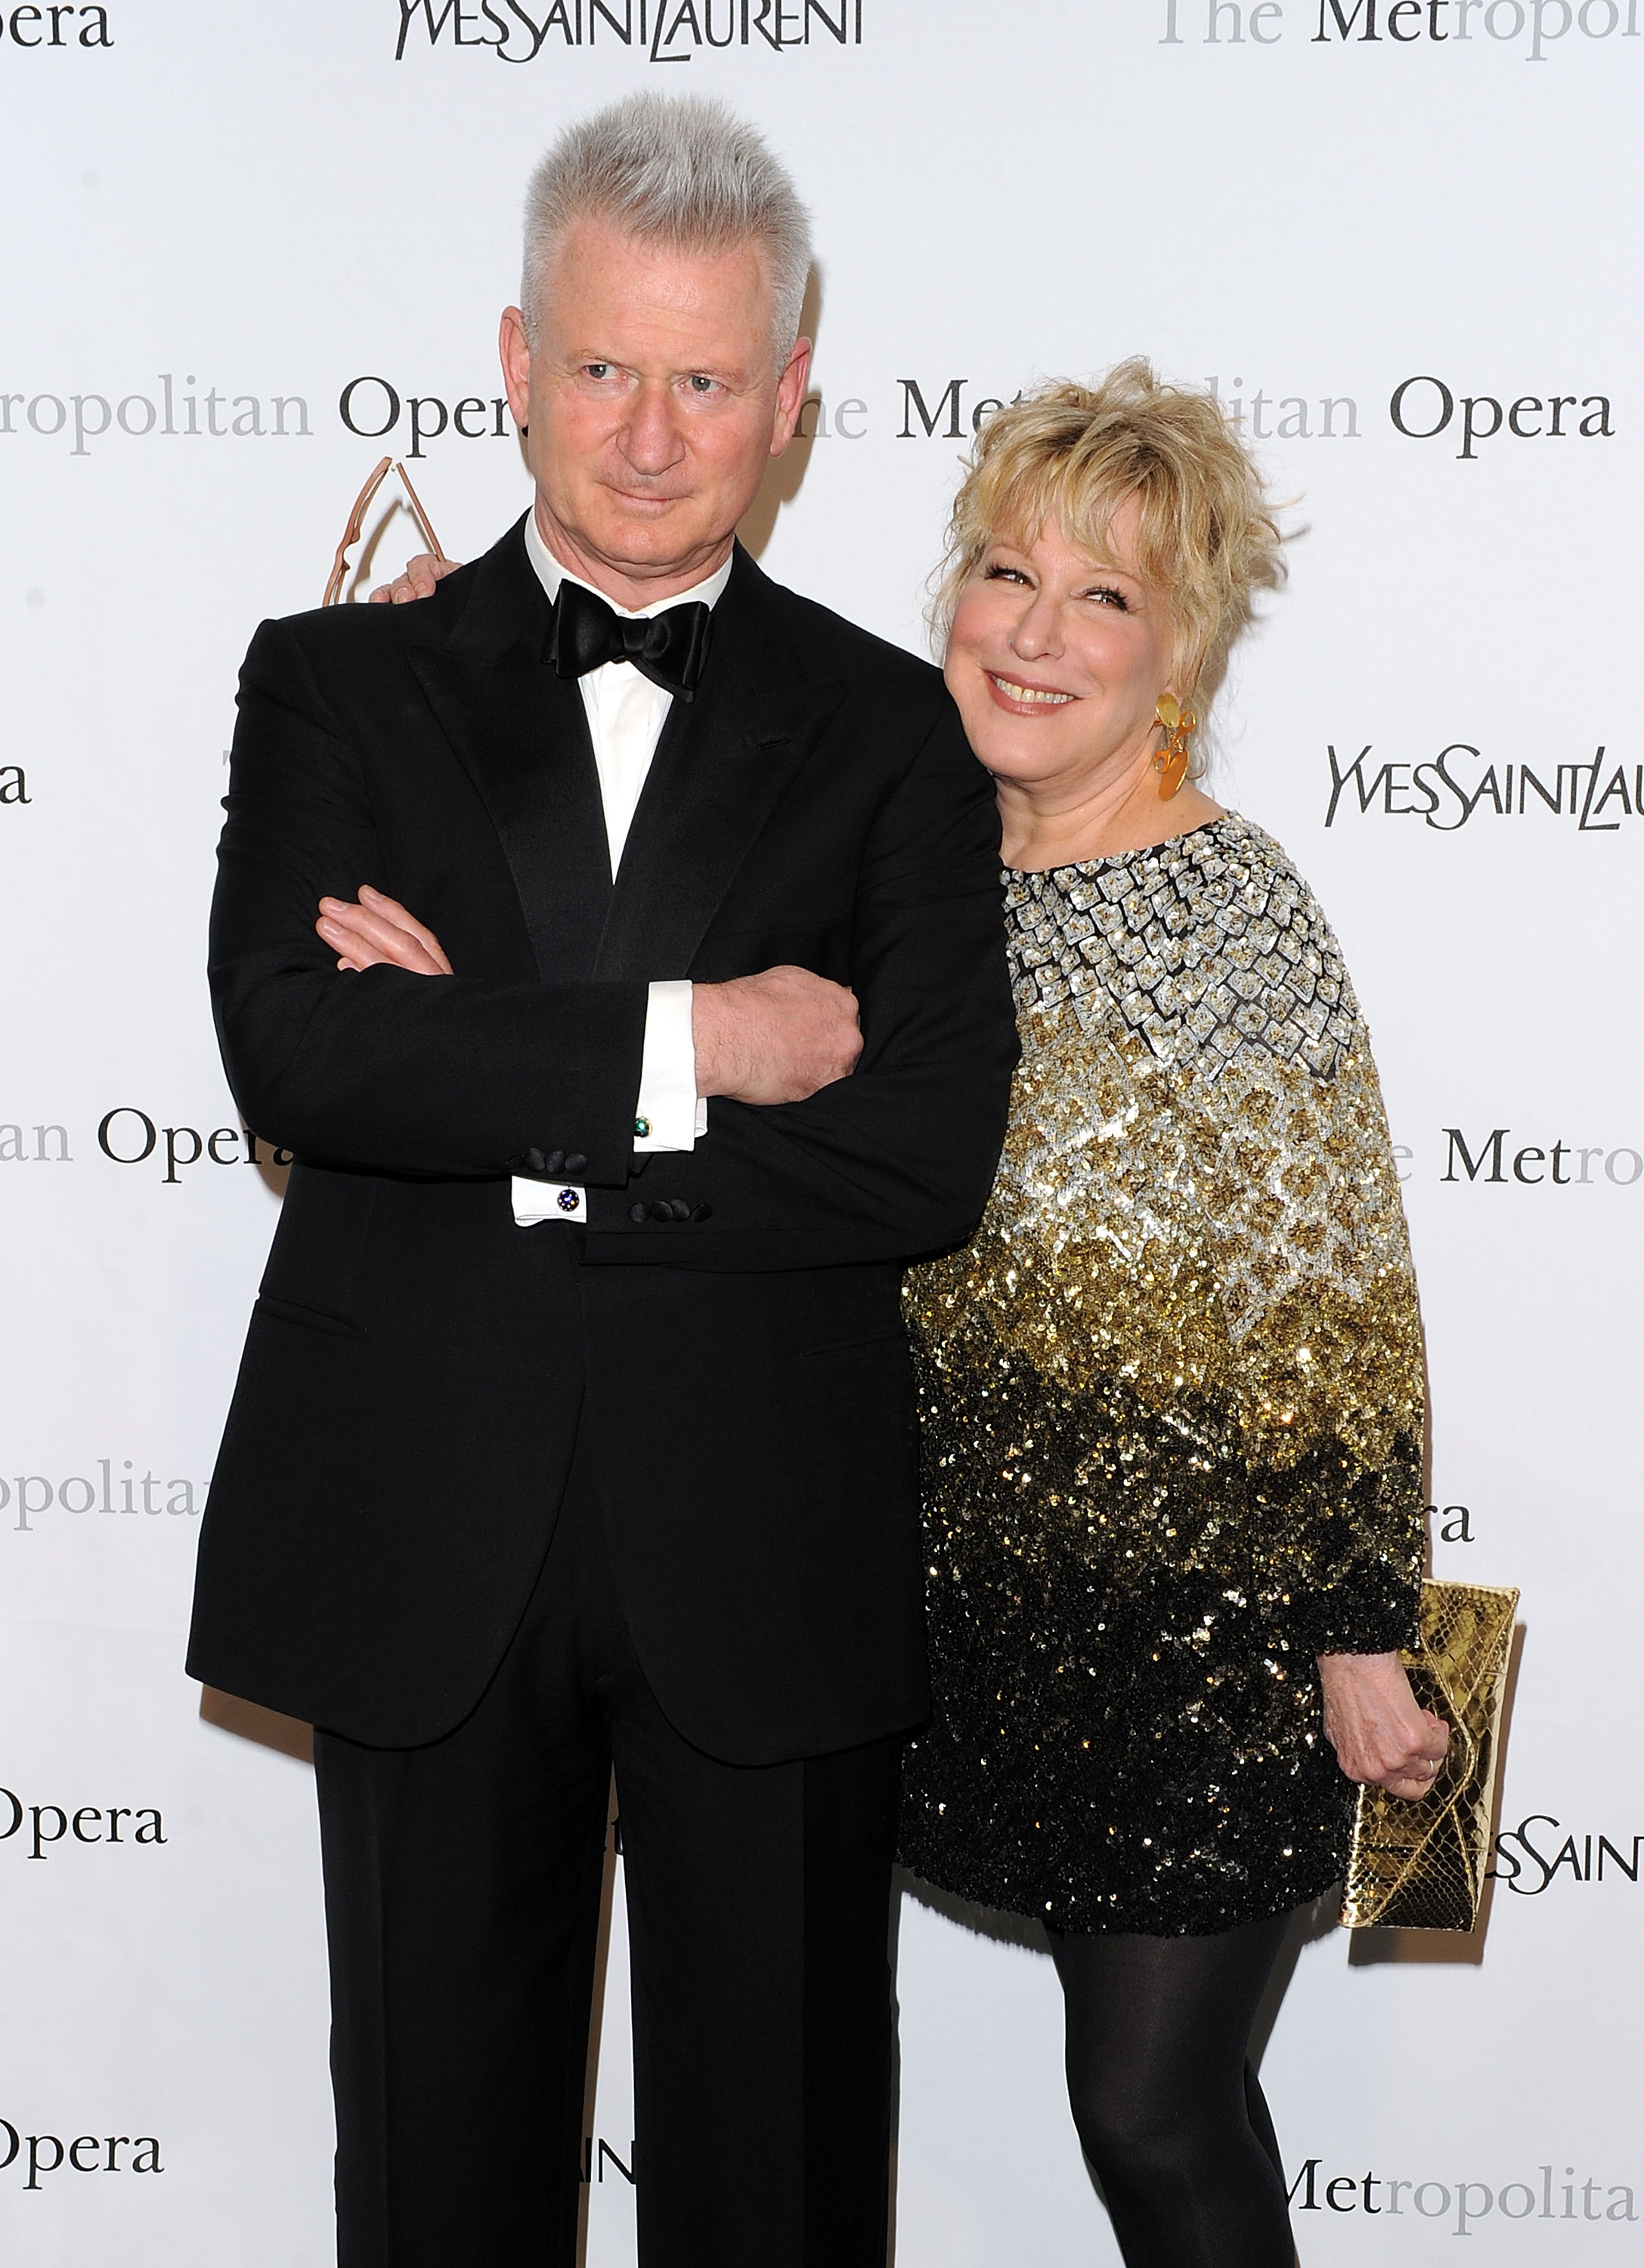 Martin von Haselberg and Bette Midler at the Metropolitan Opera gala premiere of "Armida" in New York City, 2010 | Source: Getty Images